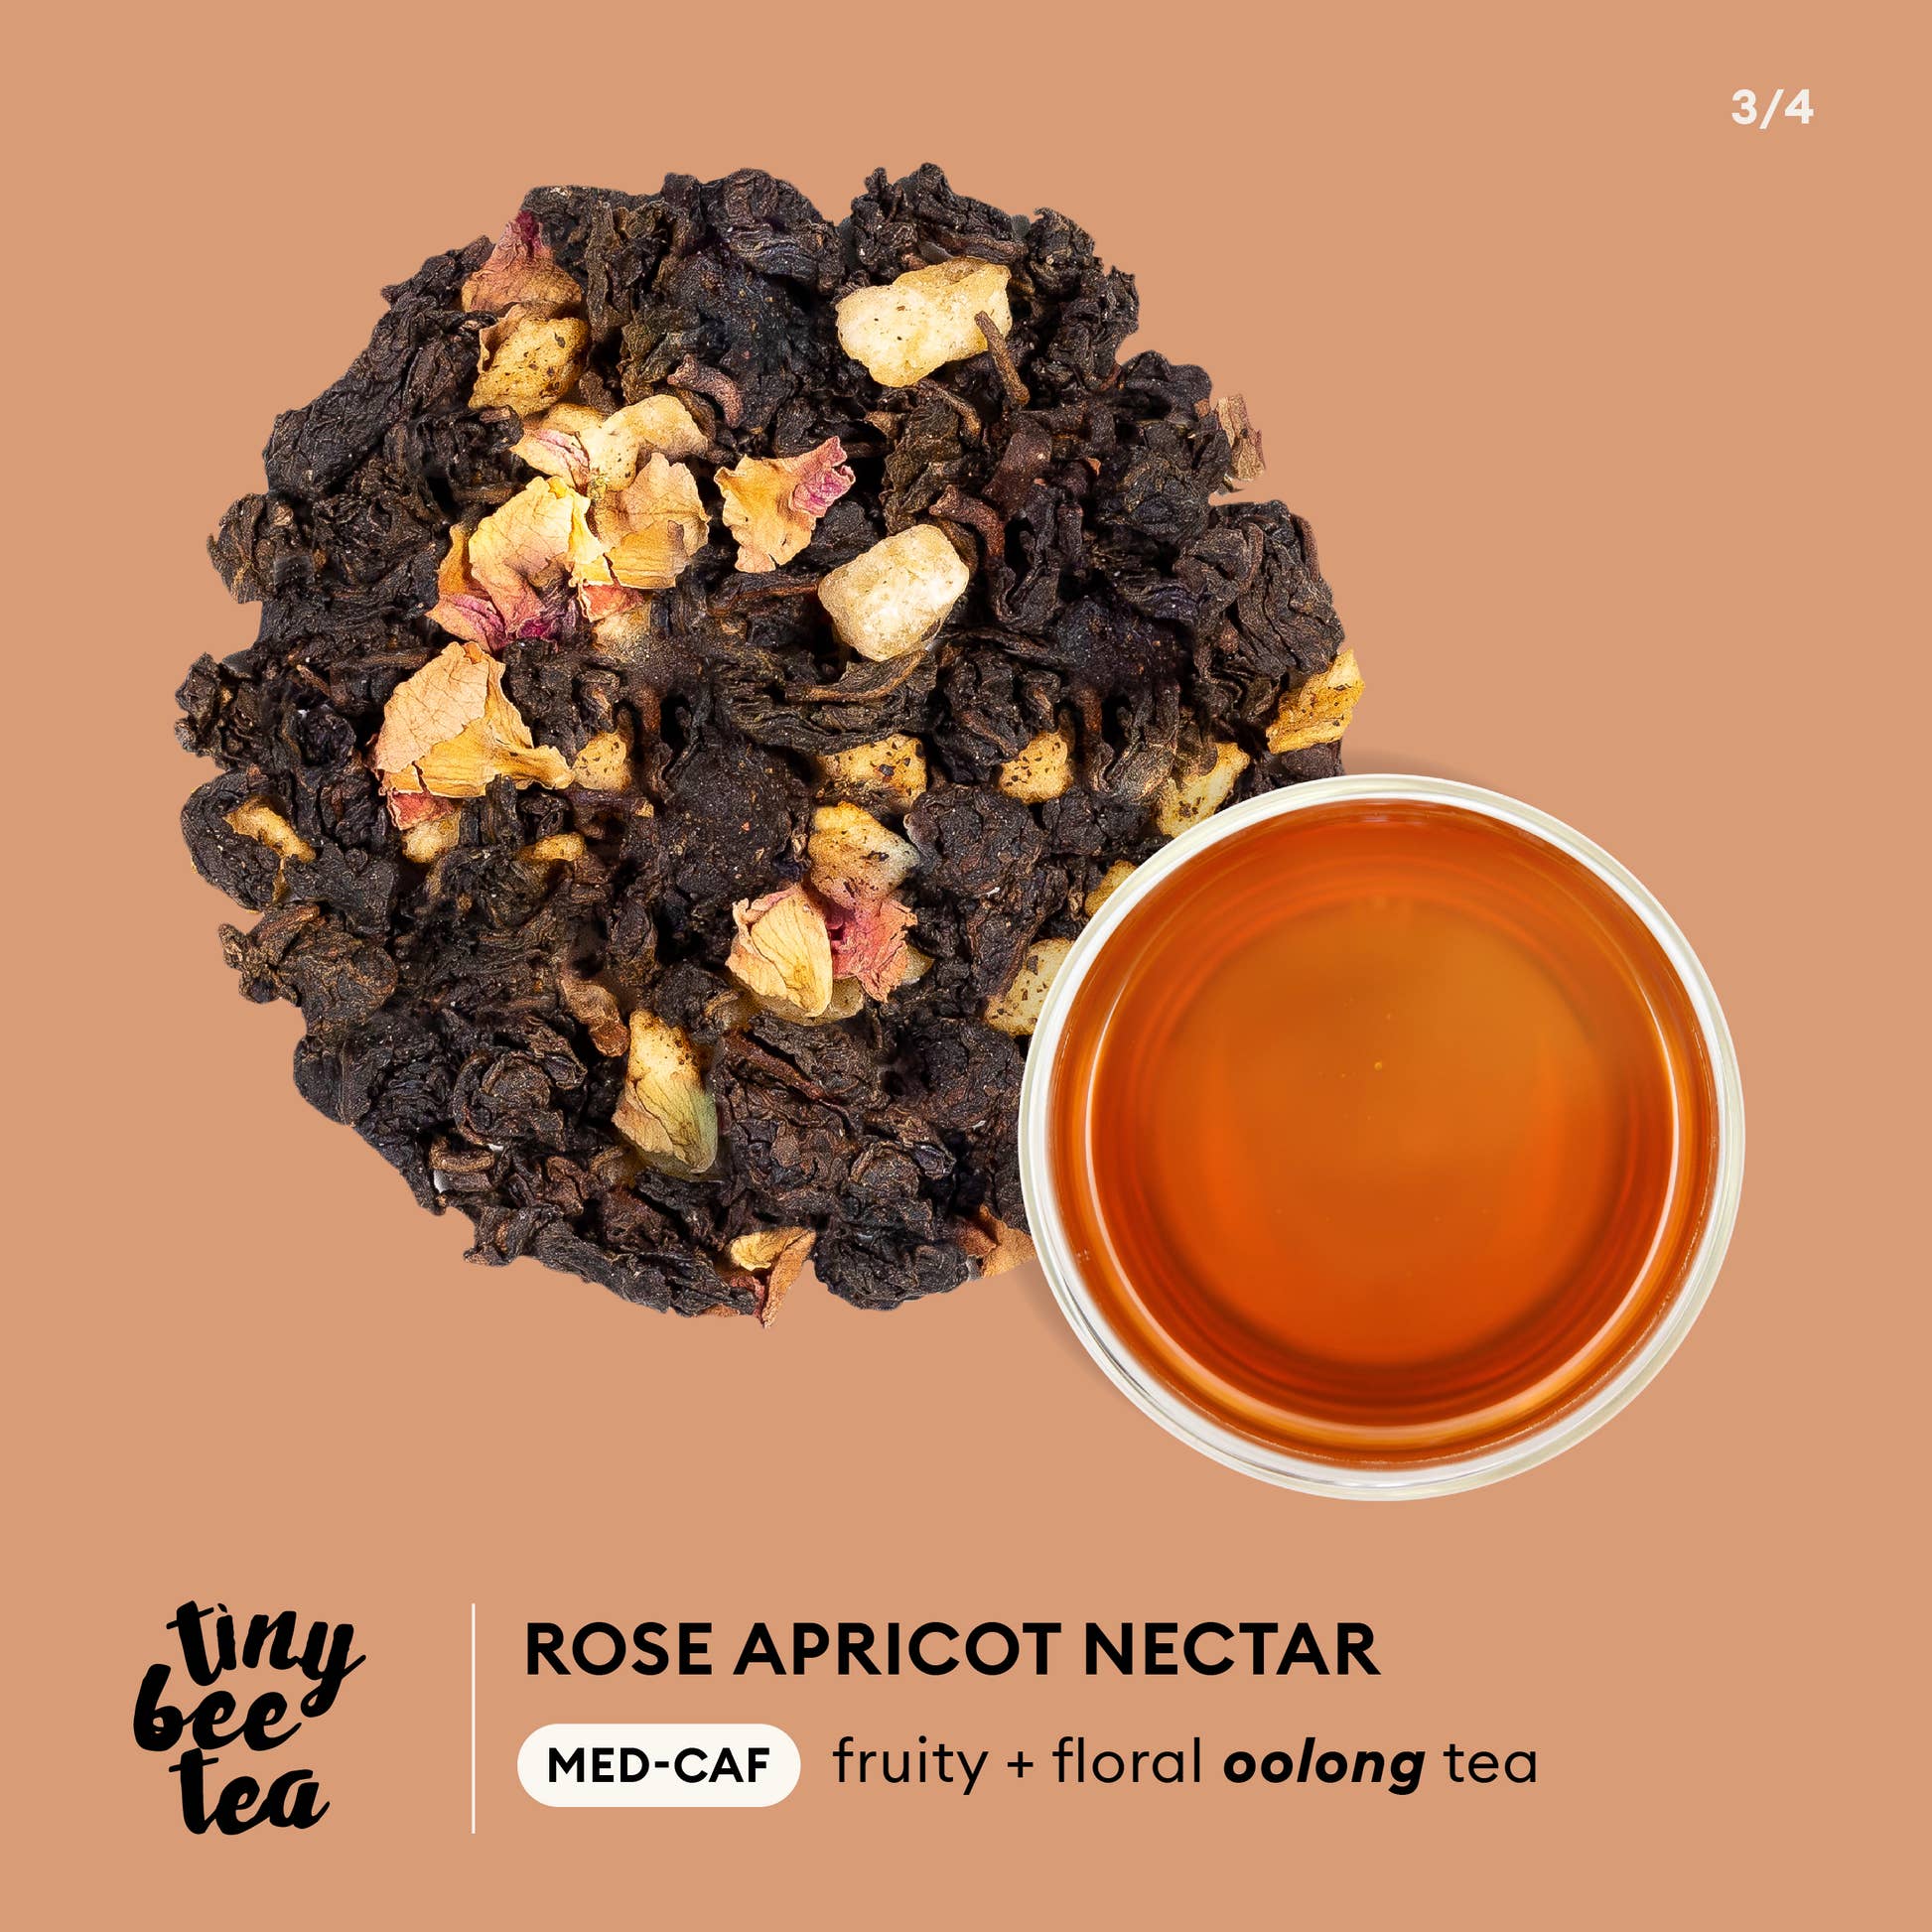 Tiny Bee Tea - Rose Apricot Nectar Infographic - MED-CAF fruity + floral oolong tea